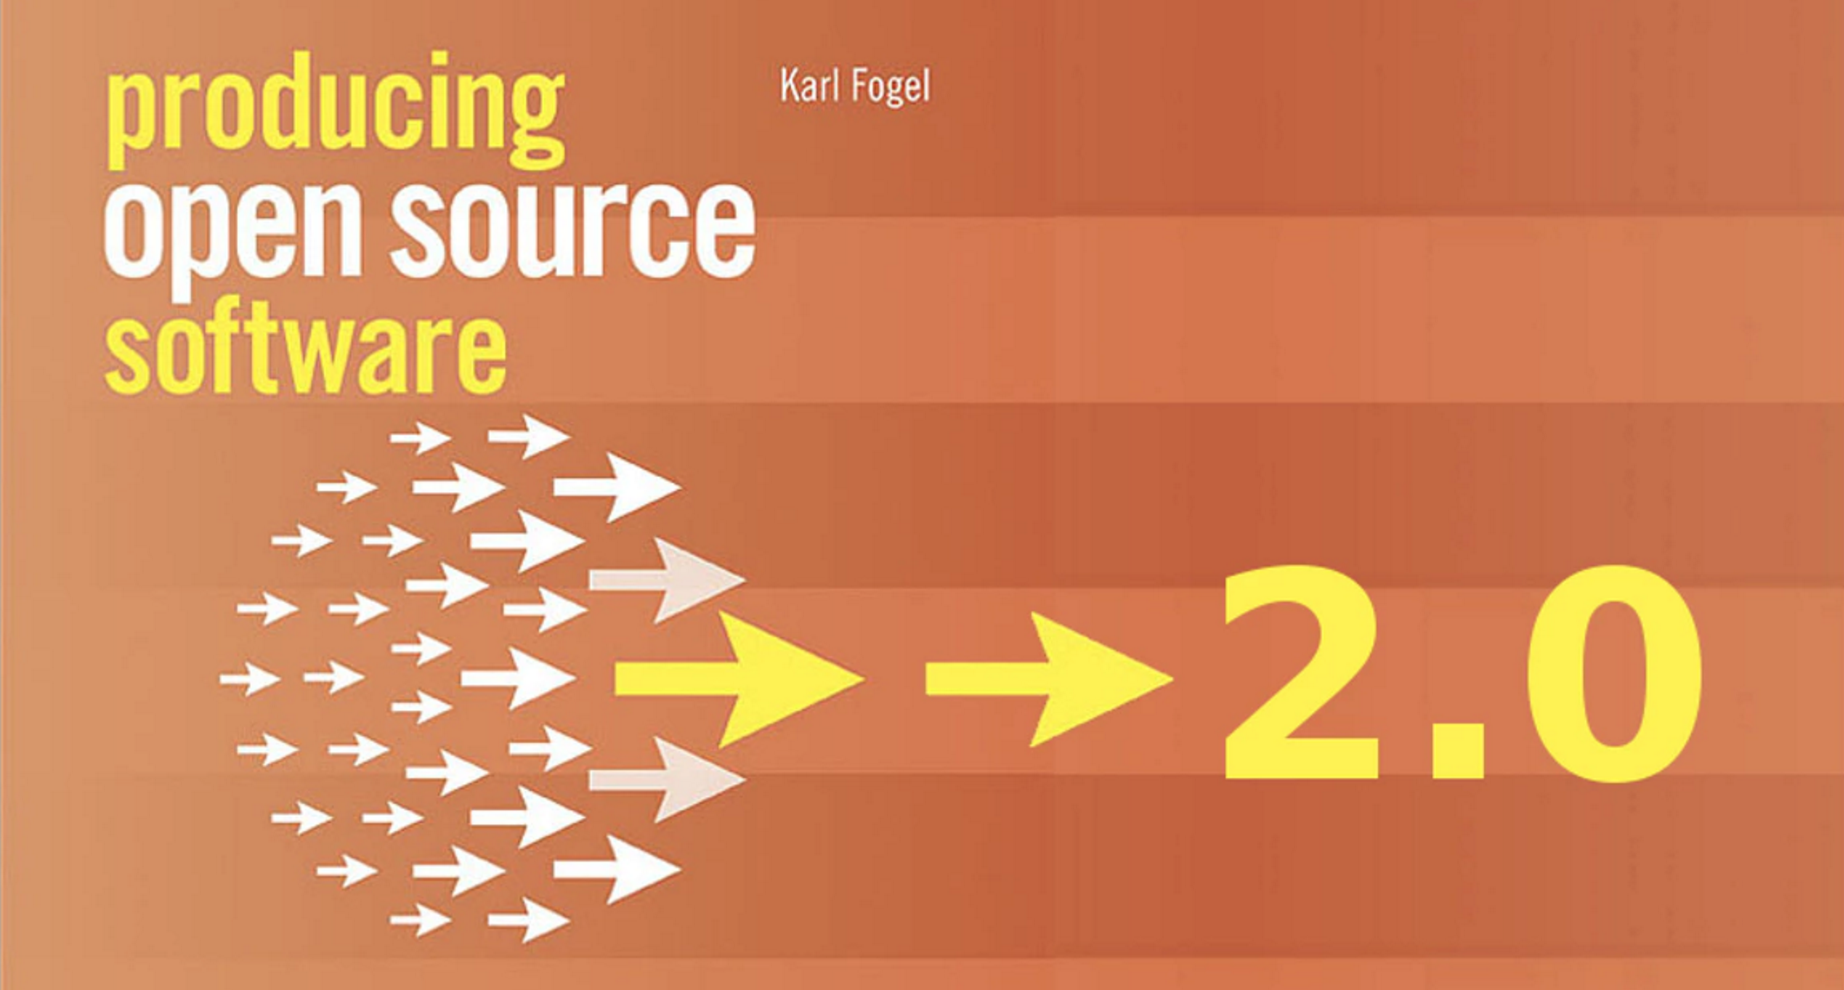 2nd Edition of Producing Open Source Software Now Available for Free